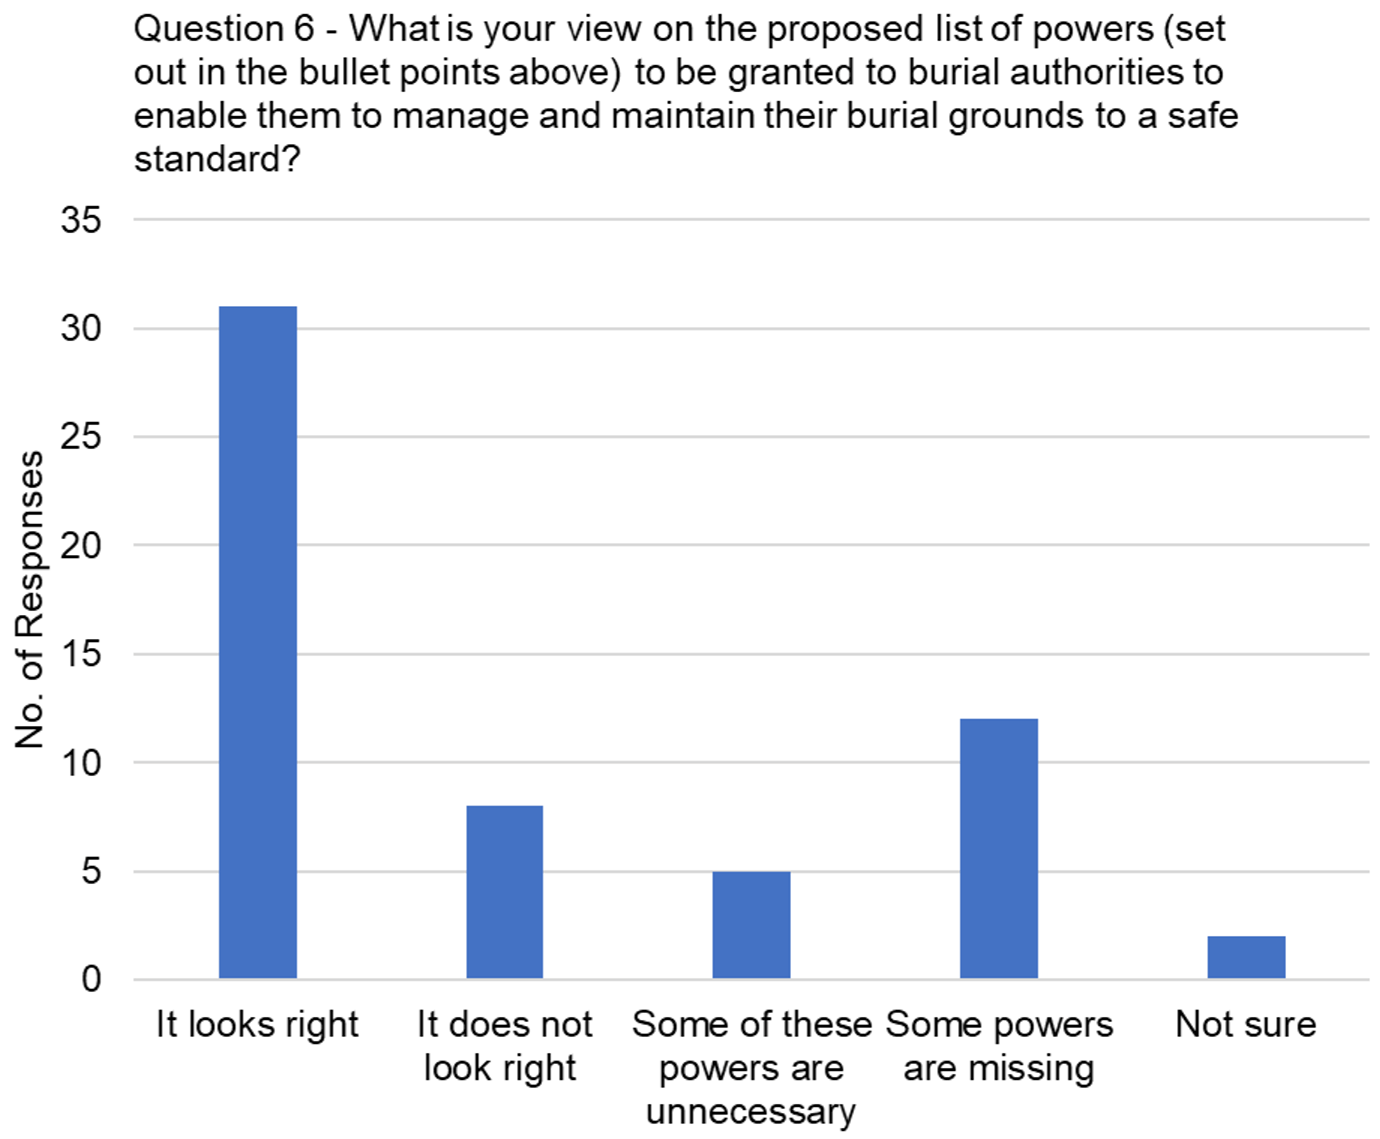 The graph visually presents the data from table 6, focussing on the responses to the question, "What is your view on the proposed list of powers to be granted to burial authorities to enable them to manage and maintain their burial grounds to a safe standard?"